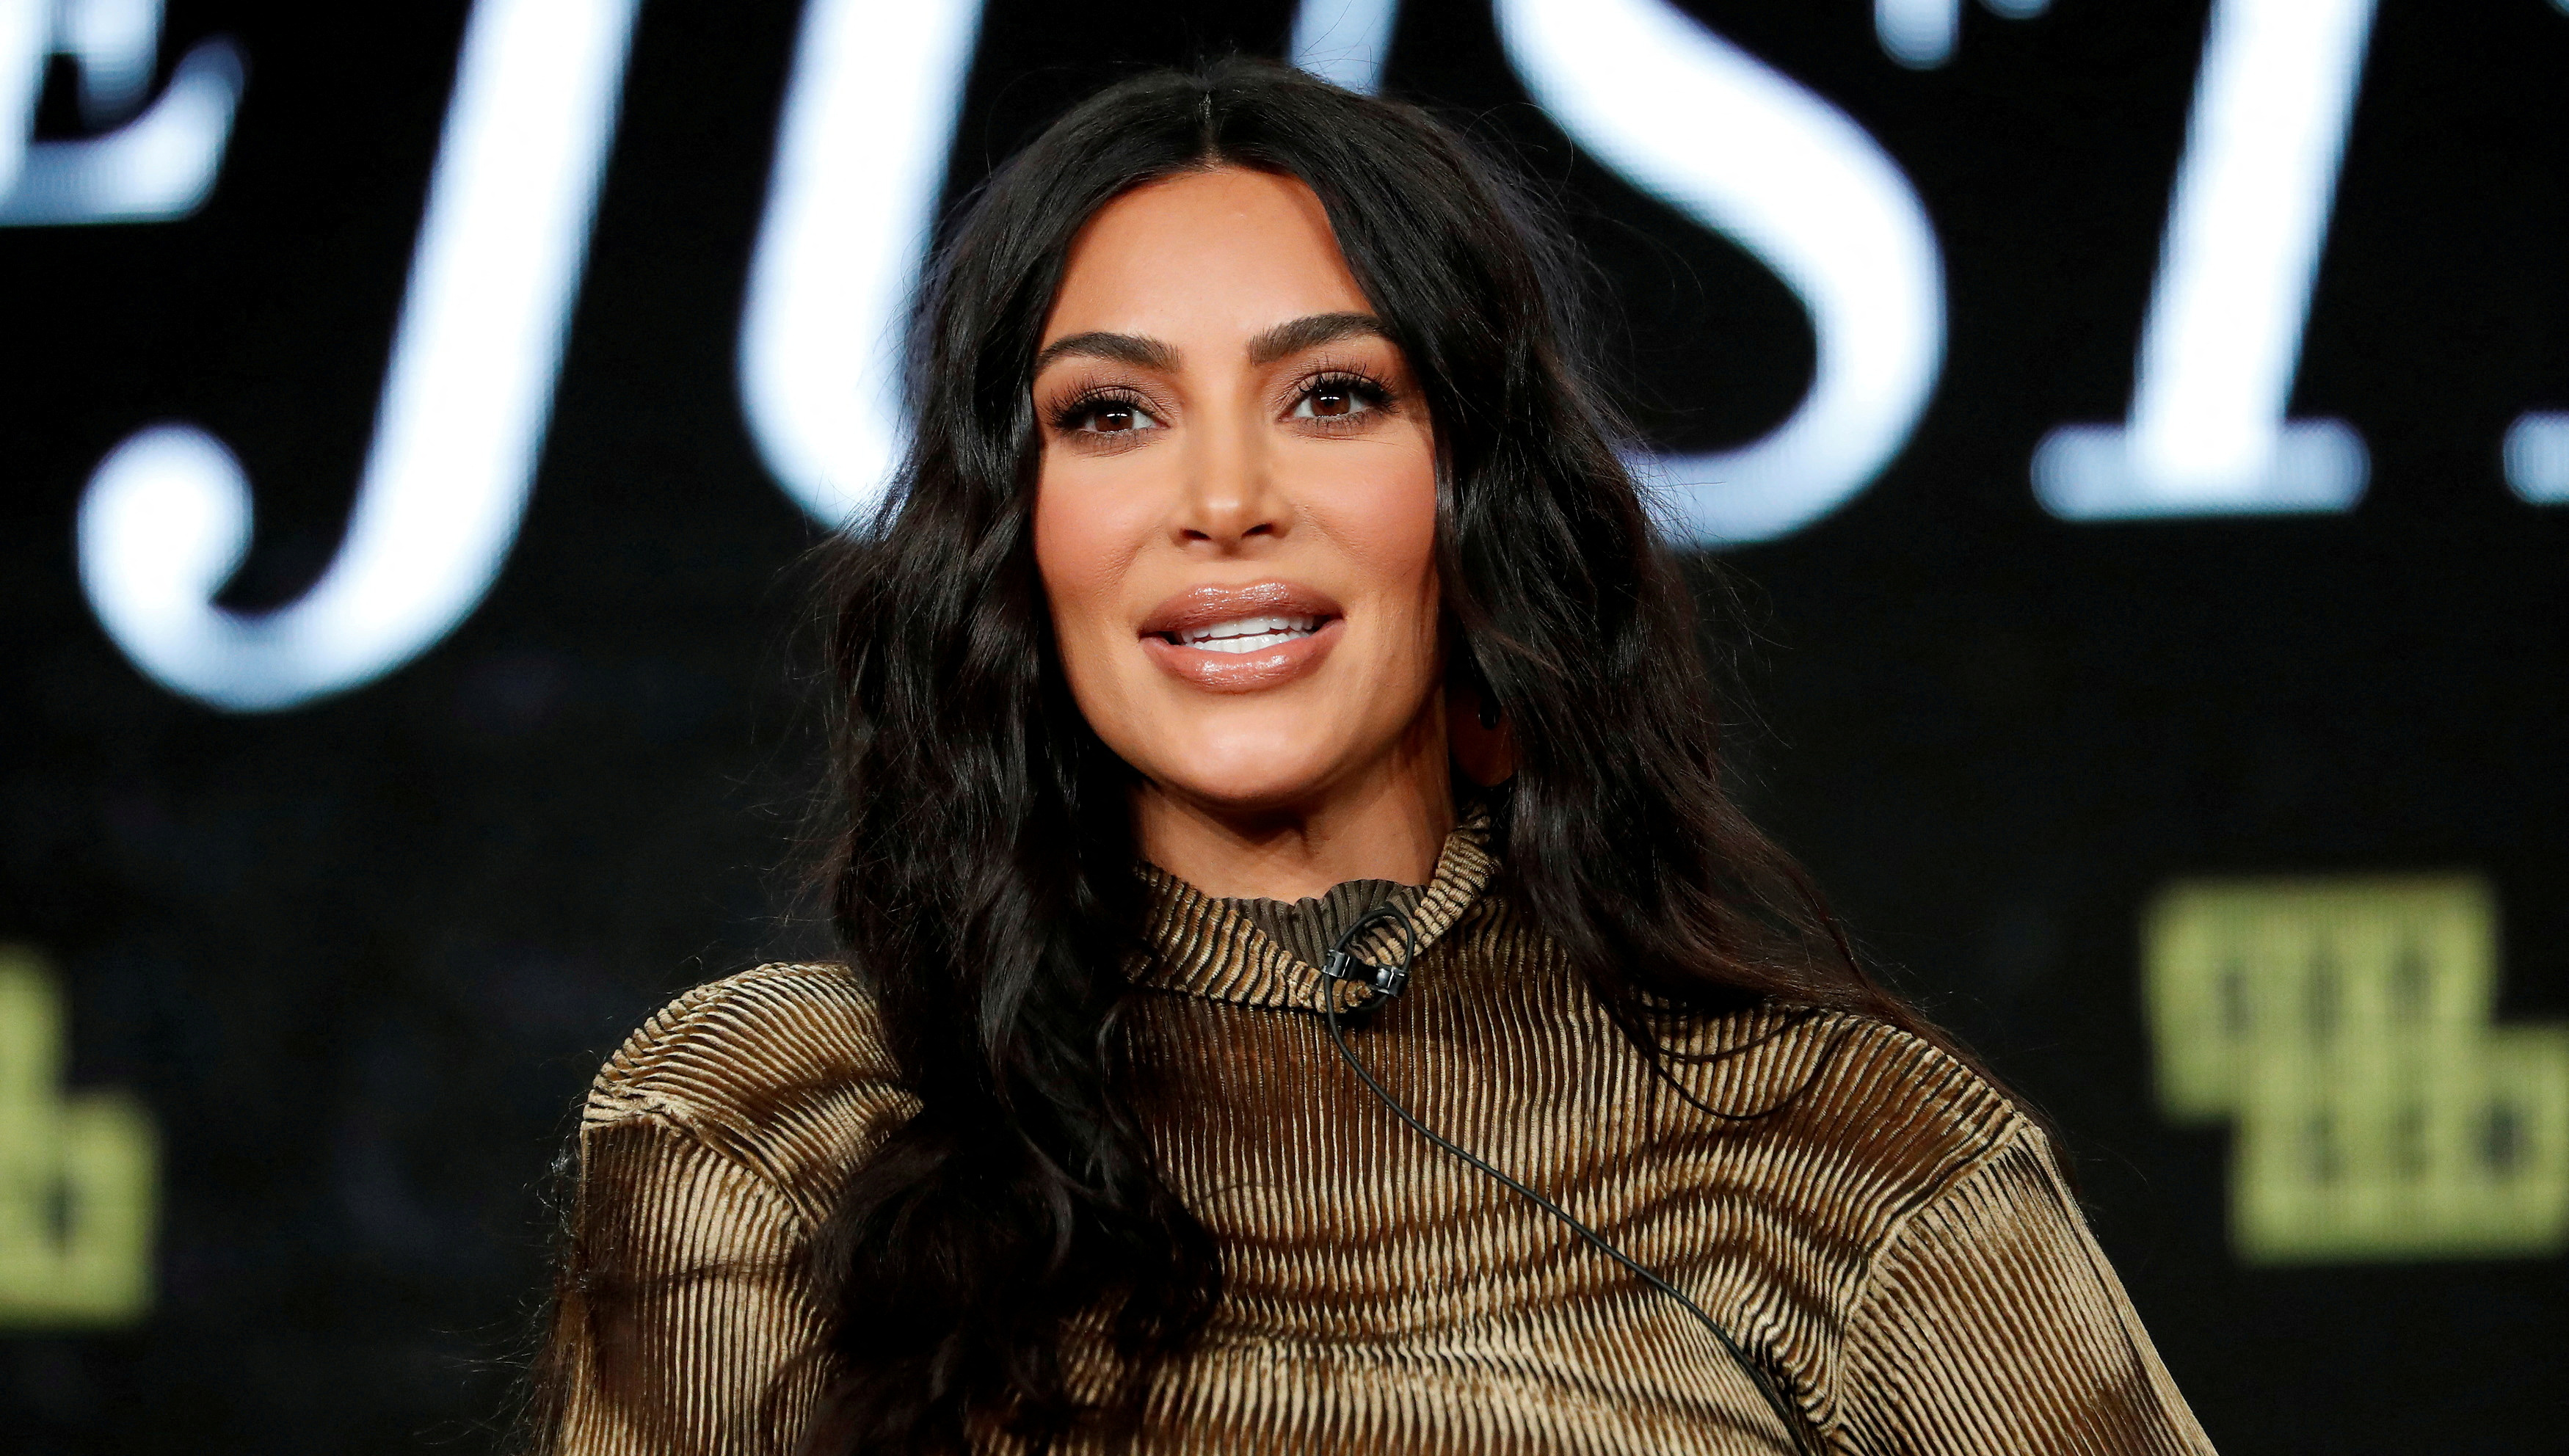 FILE PHOTO: FILE PHOTO: Television personality Kardashian attends a panel for the documentary "Kim Kardashian West: The Justice Project" during the Winter TCA (Television Critics Association) Press Tour in Pasadena